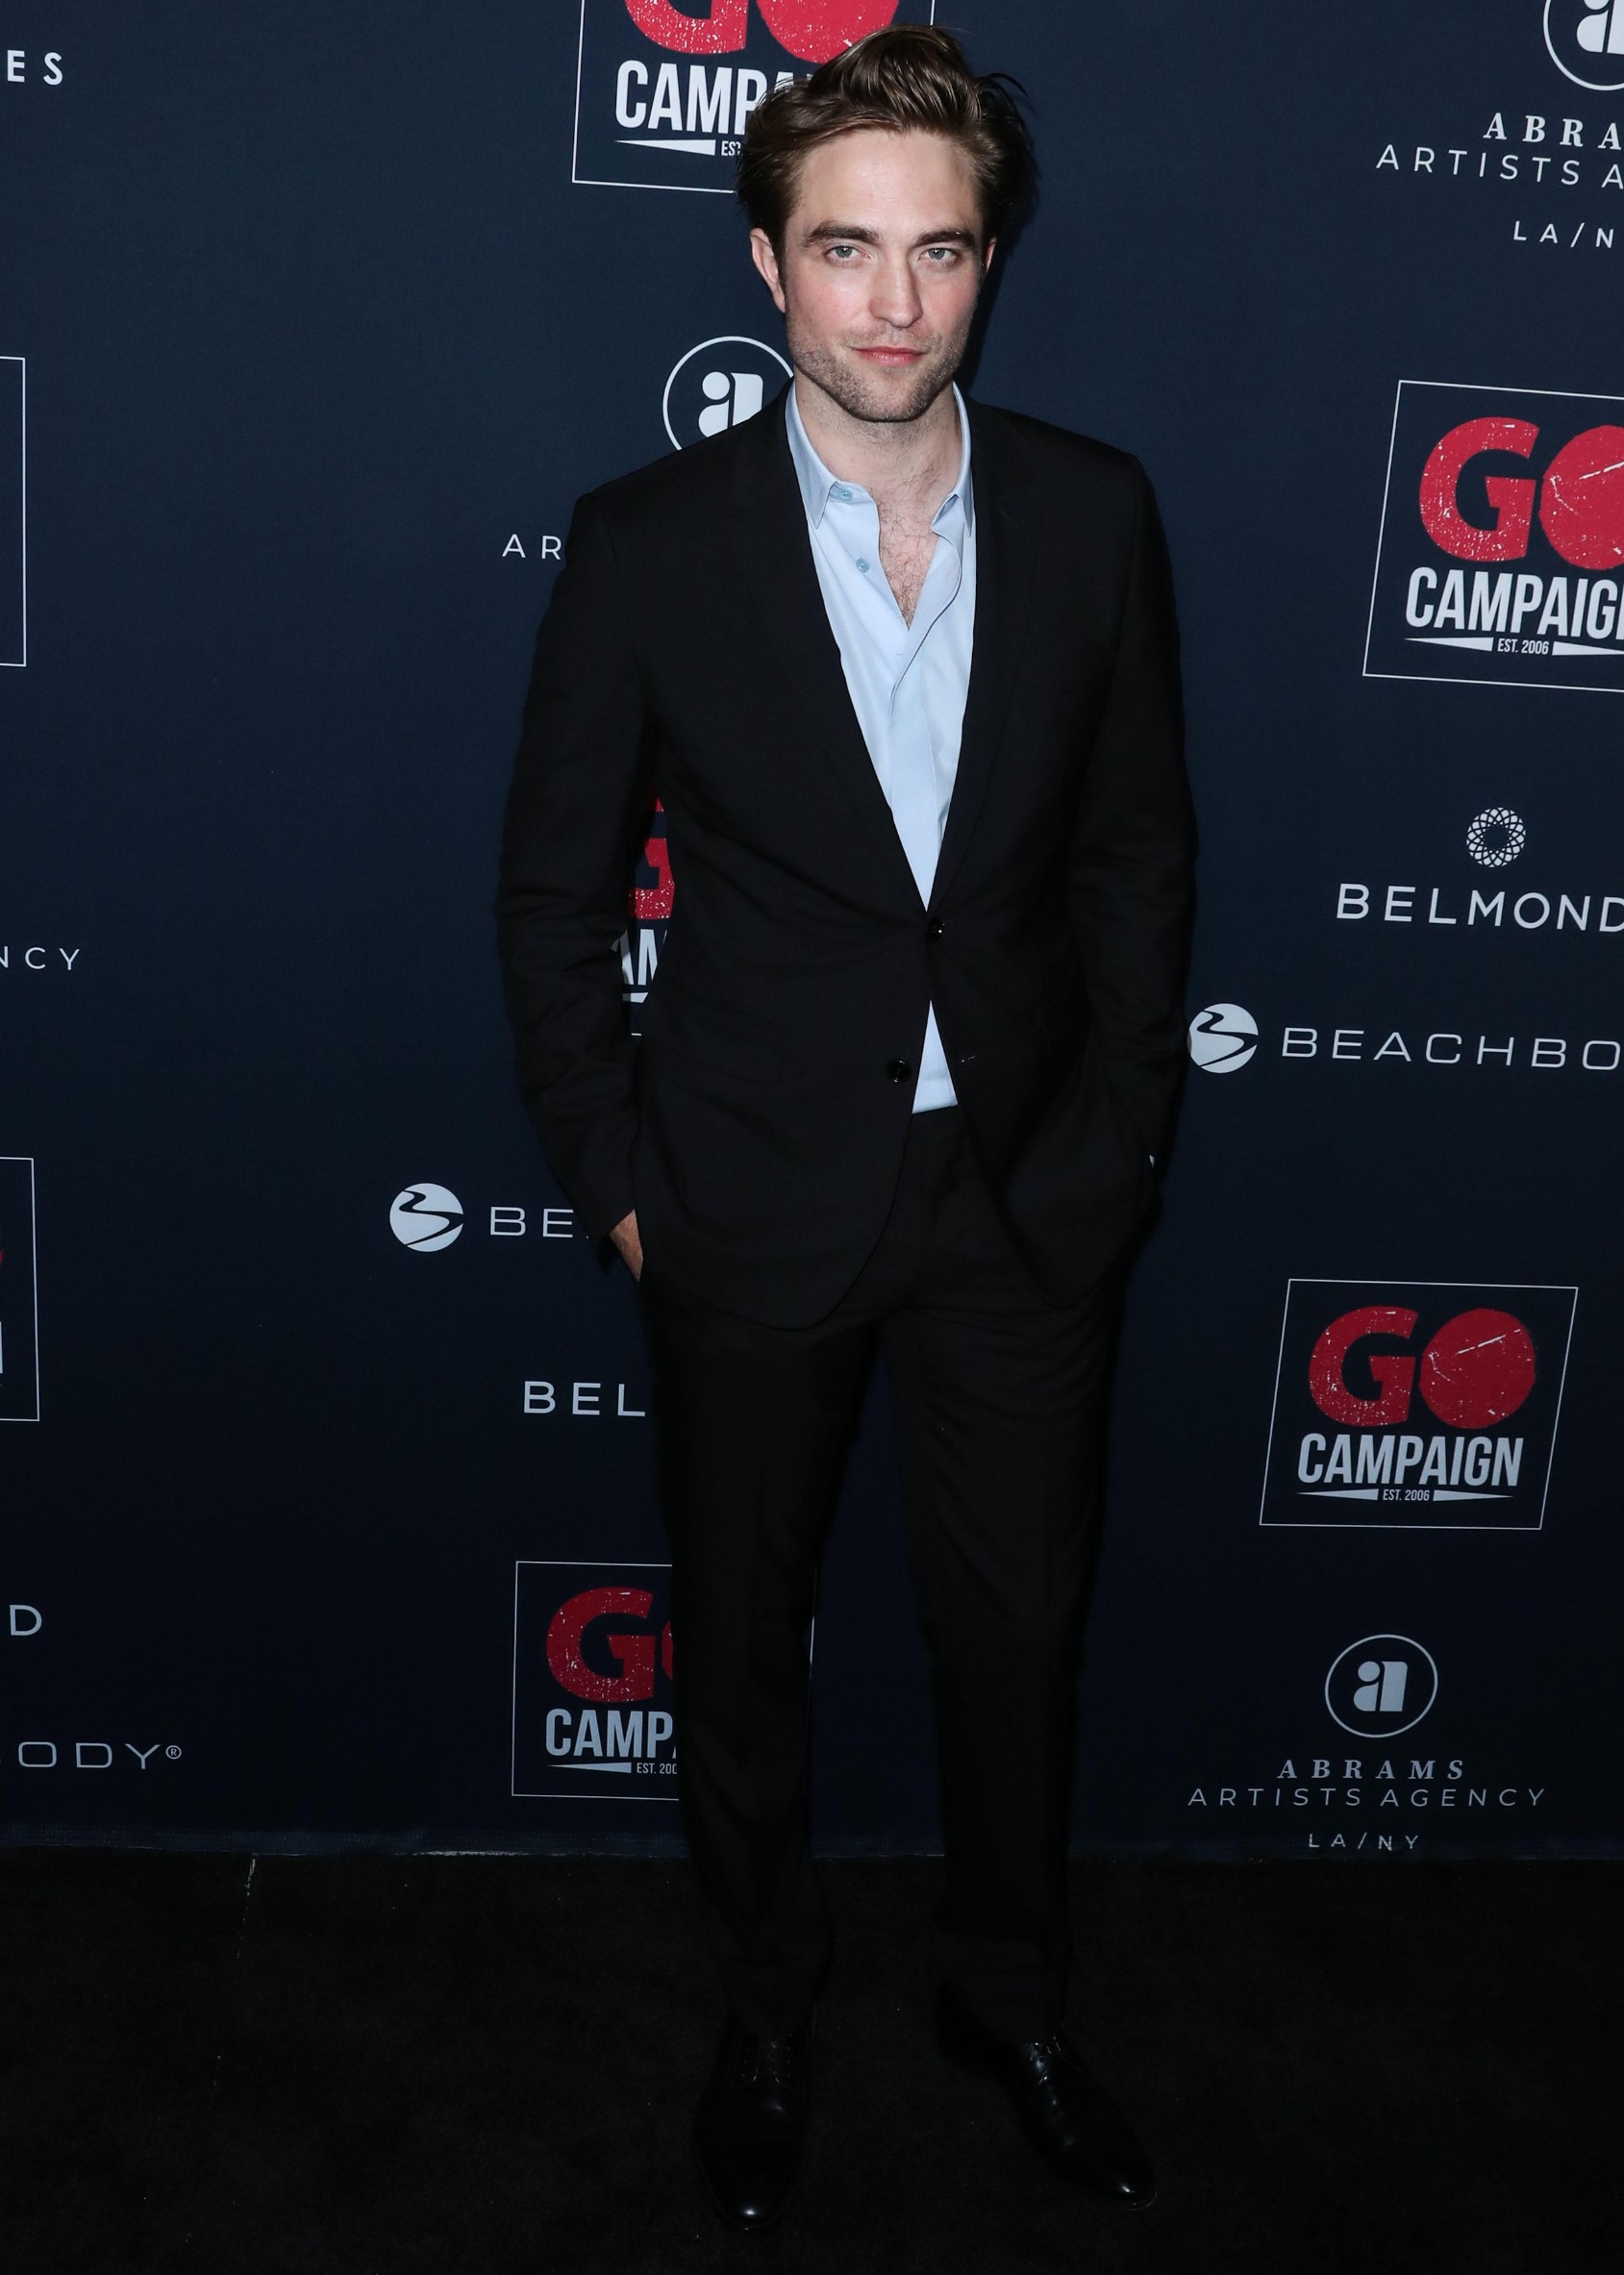 Actor Robert Pattinson arrives at the 13th Annual GO Campaign Gala 2019 held at NeueHouse Hollywood on November 16, 2019 in Hollywood, Los Angeles, California, United States.,Image: 483337410, License: Rights-managed, Restrictions: , Model Release: no, Credit line: ImagePressAgency/face to face / Face to Face / Profimedia